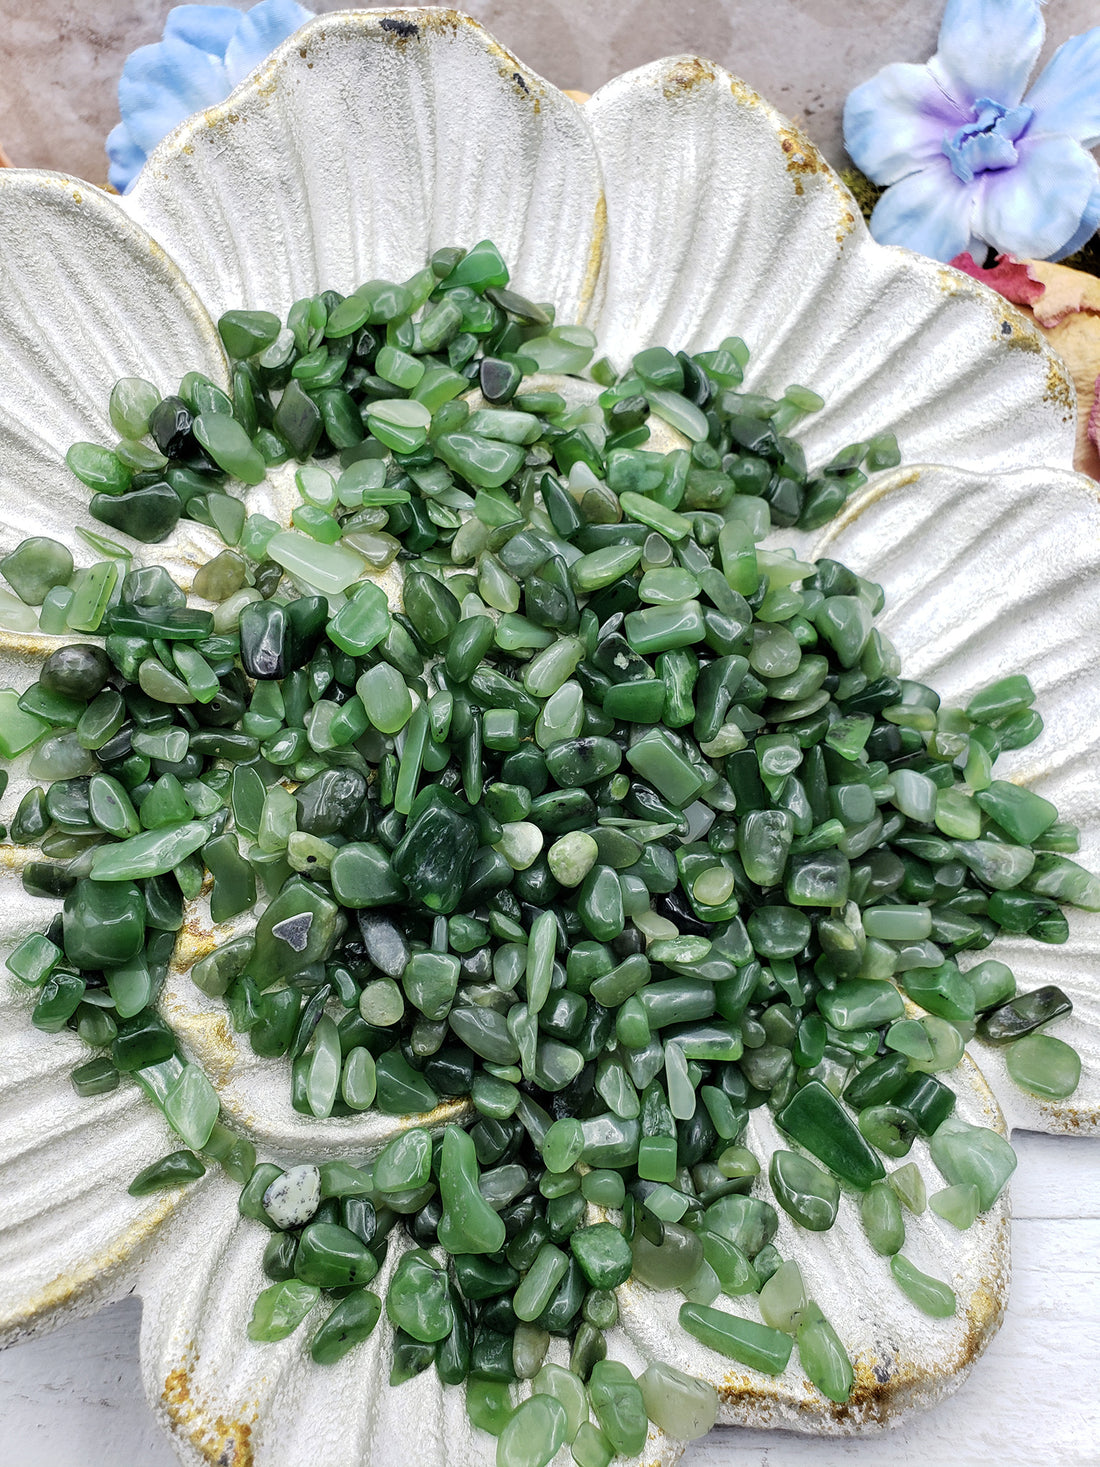 Seven ounces of nephrite jade chips on display